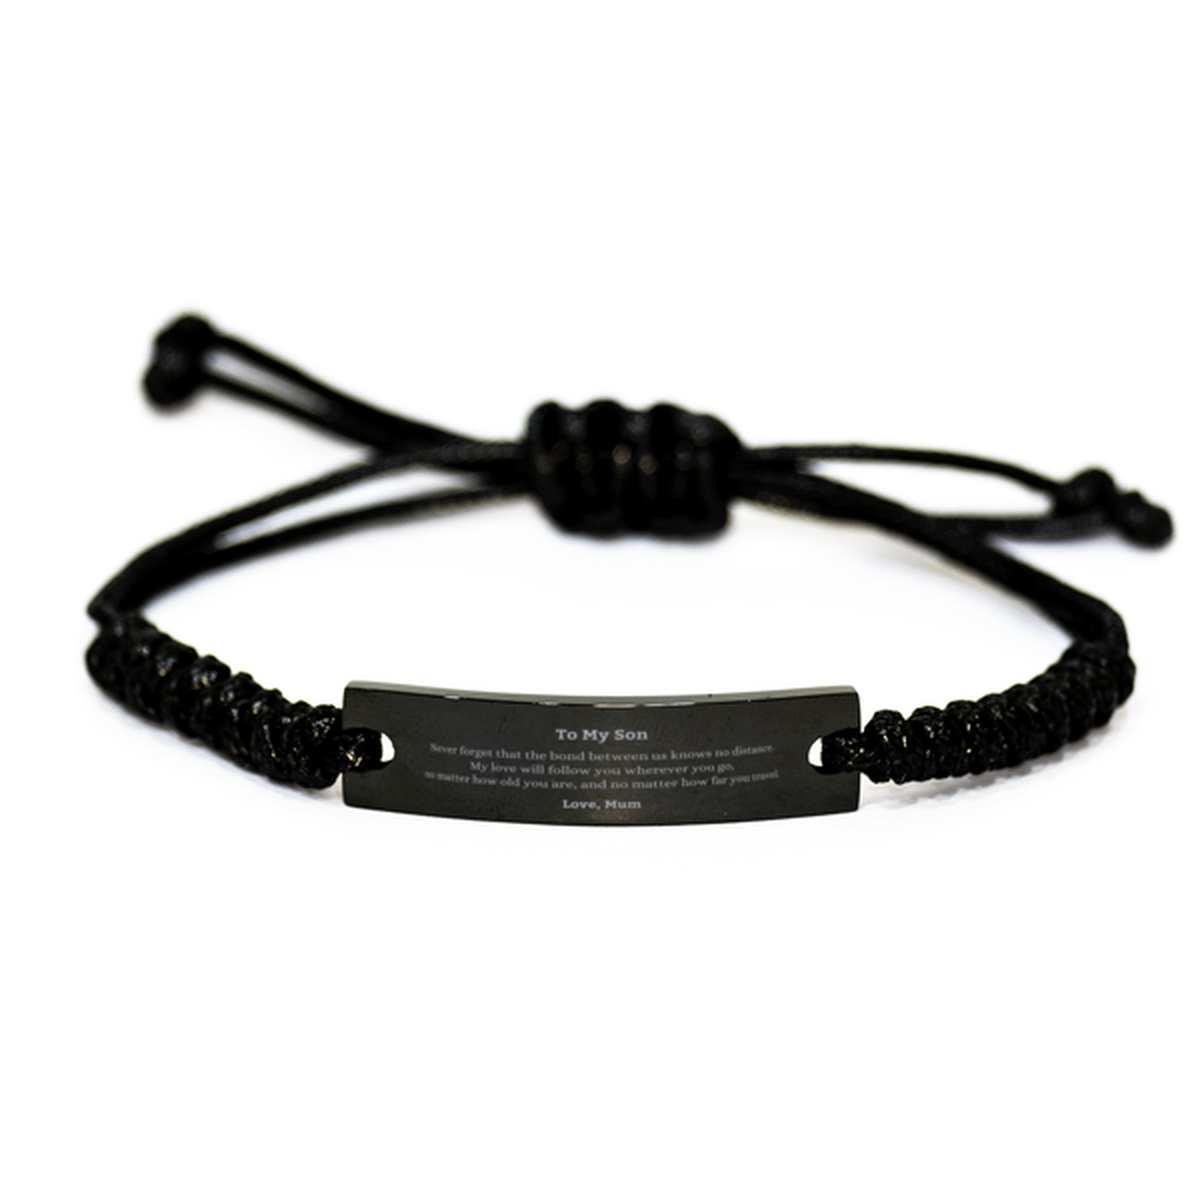 Son Birthday Gifts from Mum, Adjustable Black Rope Bracelet for Son Christmas Graduation Unique Gifts Son Never forget that the bond between us knows no distance. Love, Mum